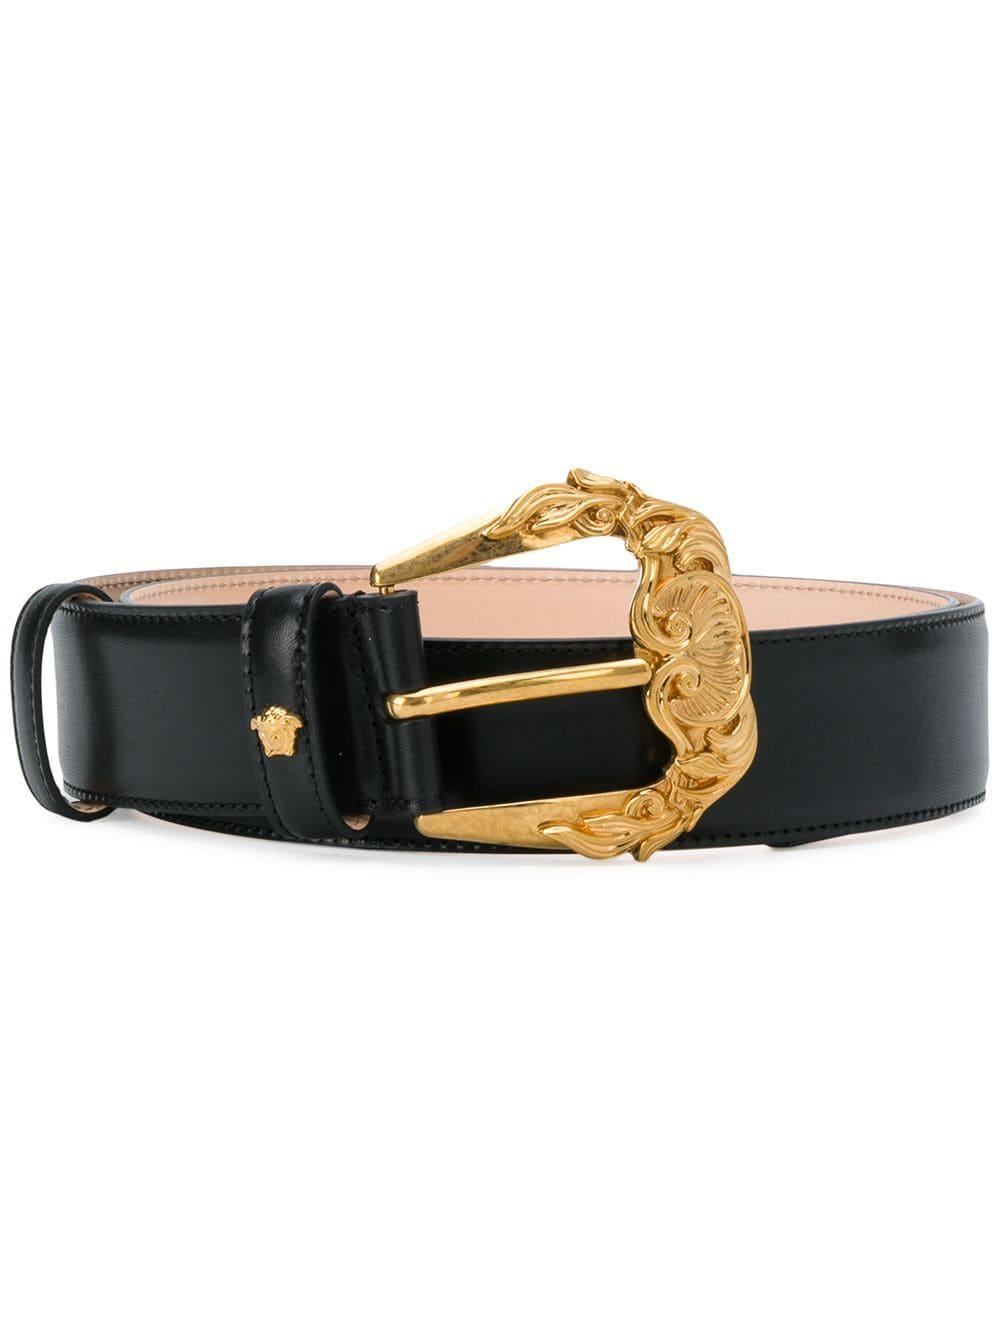 Versace Tribute Leather Belt in Black - Save 60% - Lyst